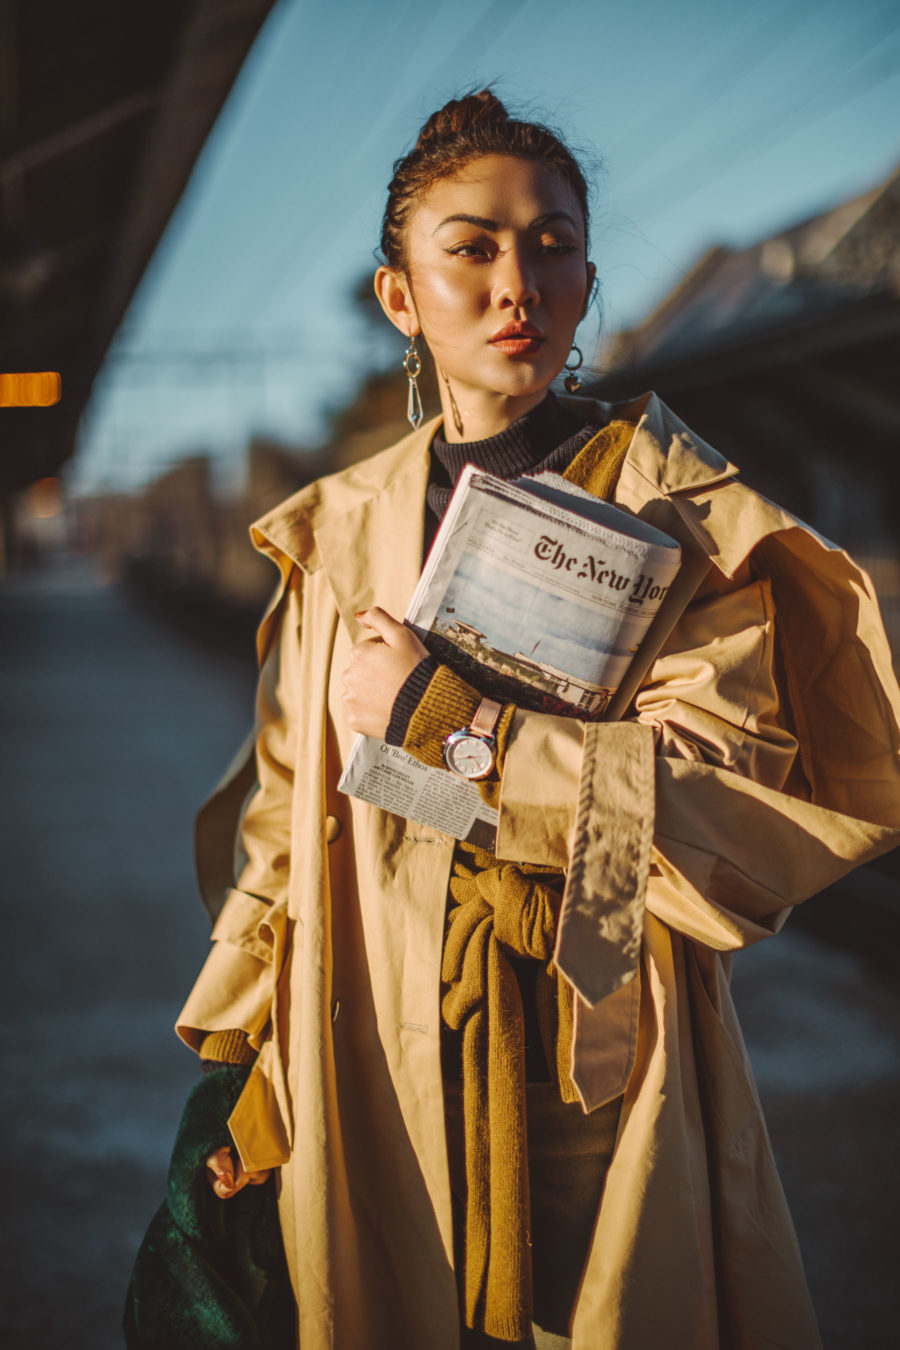 Instagram Outfits Round Up // Notjessfashion.com // Cozy Layered looks, jessica wang, fashion blogger, new york fashion blogger, street style fashion, ootd, asian blogger, oversized trench coat, leather band watch, layered style